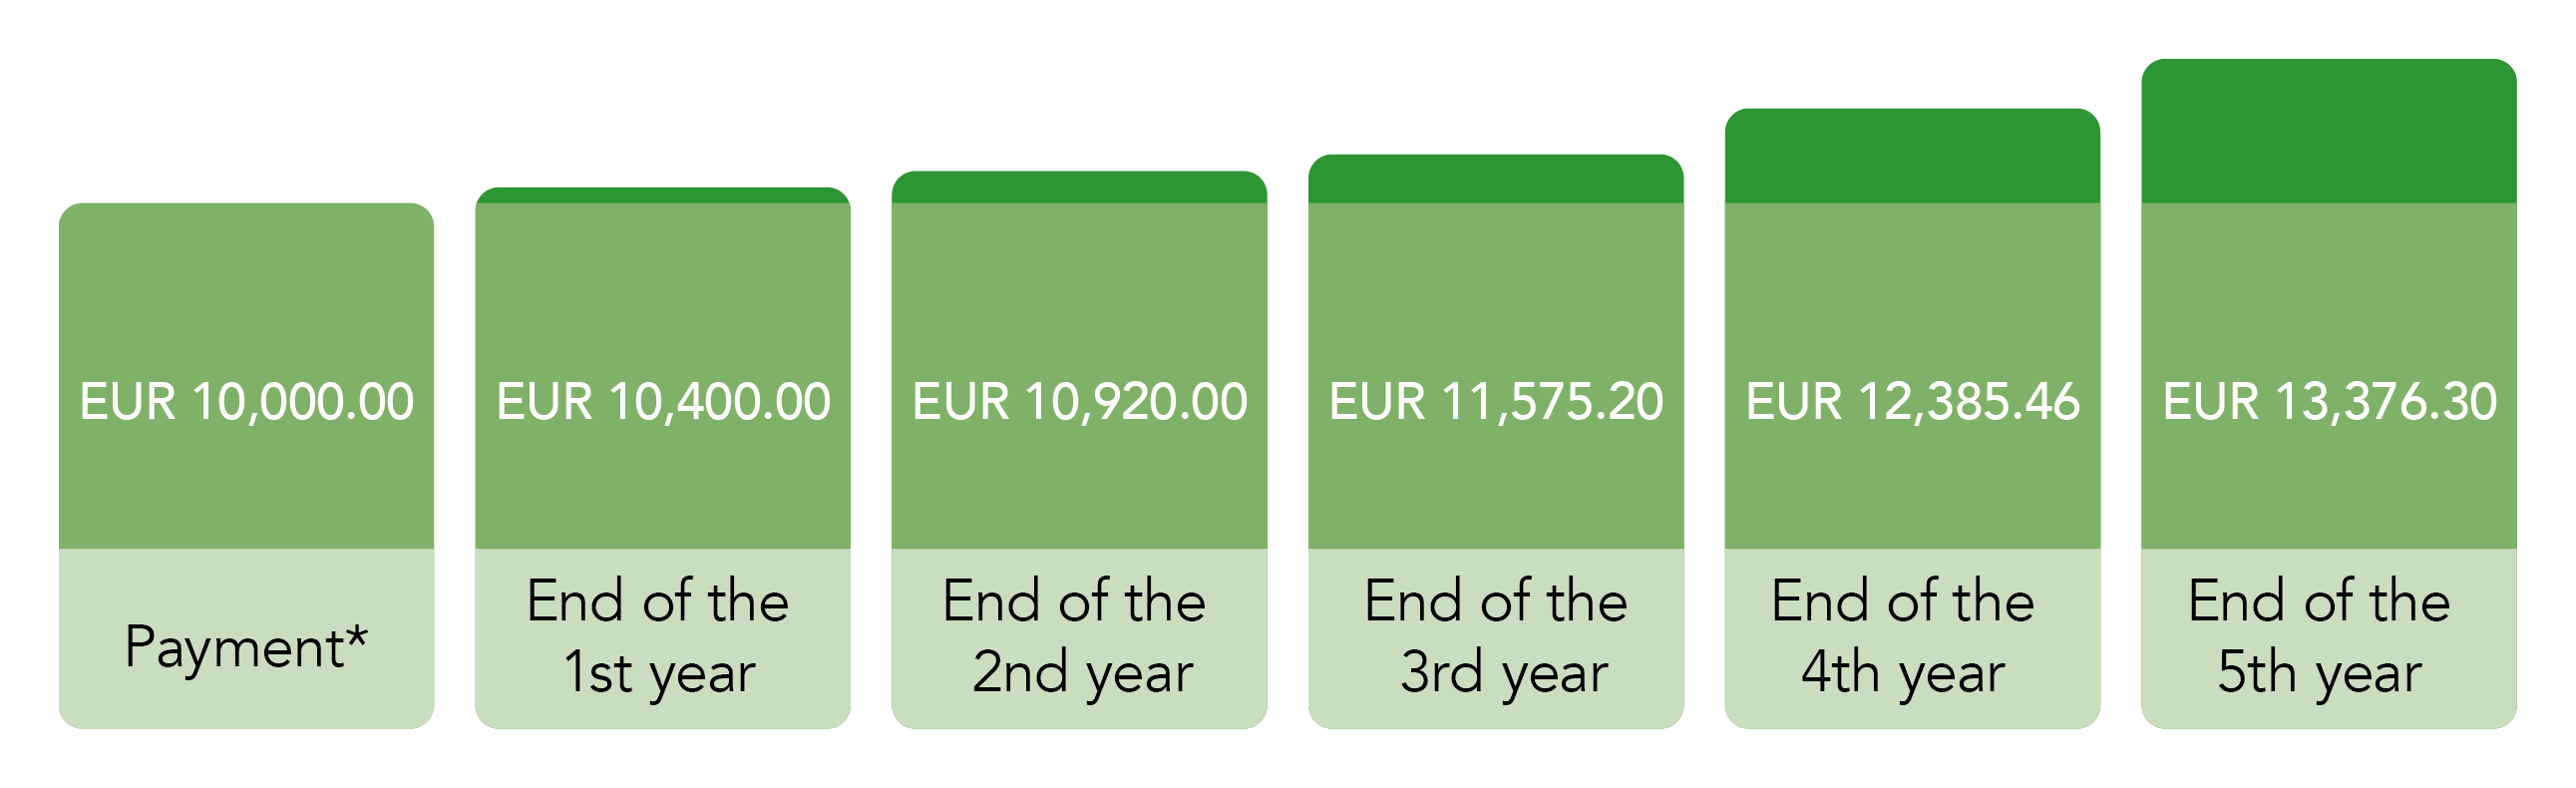 Diagram showing the interest in the following years after a one-off payment - more information can be found in the description of the image.